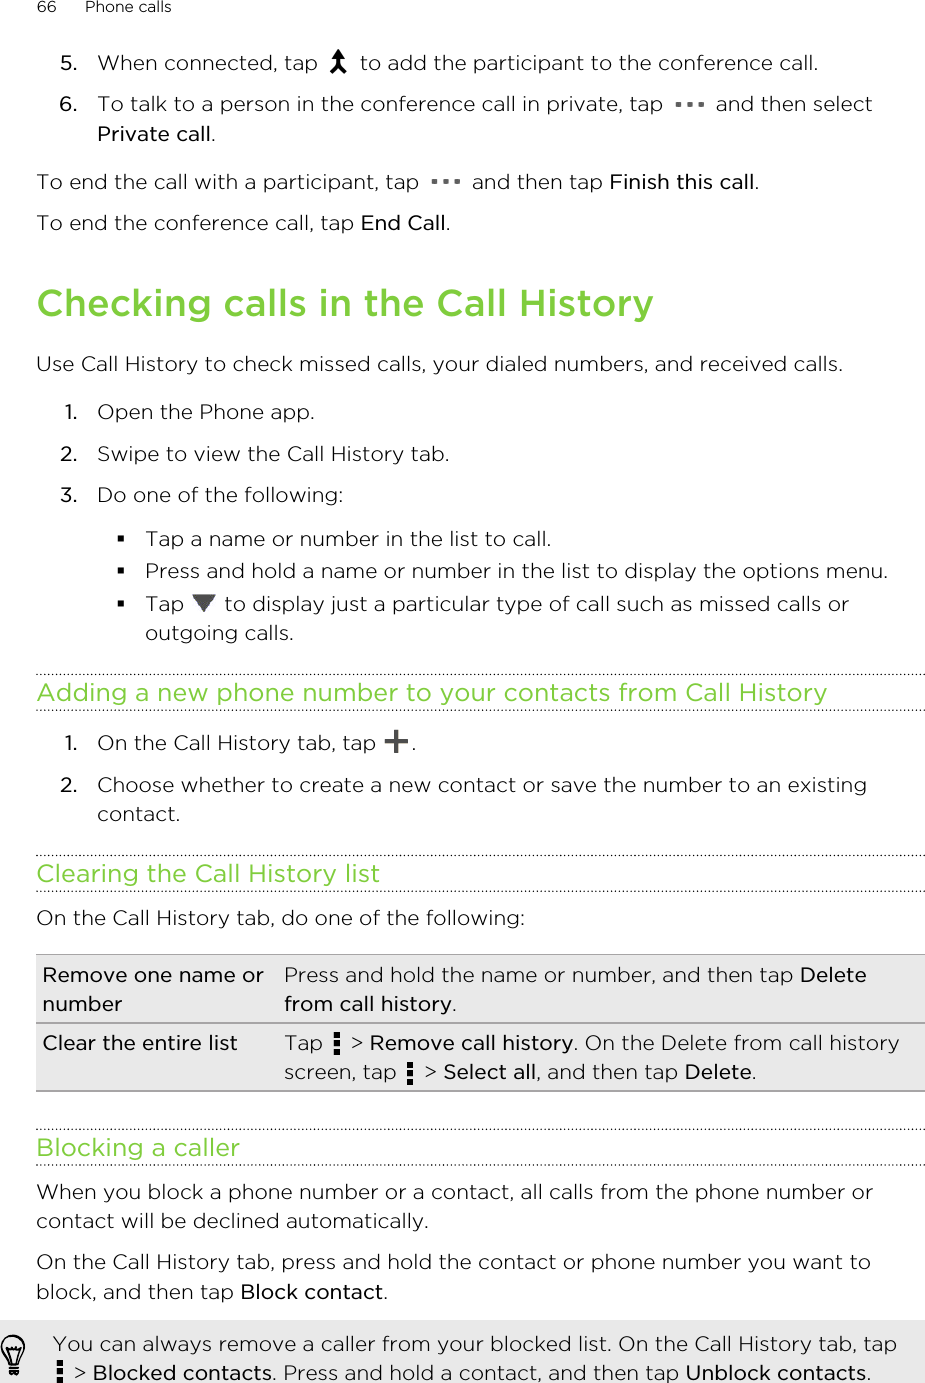 5. When connected, tap   to add the participant to the conference call.6. To talk to a person in the conference call in private, tap   and then selectPrivate call.To end the call with a participant, tap   and then tap Finish this call.To end the conference call, tap End Call.Checking calls in the Call HistoryUse Call History to check missed calls, your dialed numbers, and received calls.1. Open the Phone app.2. Swipe to view the Call History tab.3. Do one of the following:§Tap a name or number in the list to call.§Press and hold a name or number in the list to display the options menu.§Tap   to display just a particular type of call such as missed calls oroutgoing calls.Adding a new phone number to your contacts from Call History1. On the Call History tab, tap  .2. Choose whether to create a new contact or save the number to an existingcontact.Clearing the Call History listOn the Call History tab, do one of the following:Remove one name ornumberPress and hold the name or number, and then tap Deletefrom call history.Clear the entire list Tap   &gt; Remove call history. On the Delete from call historyscreen, tap   &gt; Select all, and then tap Delete.Blocking a callerWhen you block a phone number or a contact, all calls from the phone number orcontact will be declined automatically.On the Call History tab, press and hold the contact or phone number you want toblock, and then tap Block contact.You can always remove a caller from your blocked list. On the Call History tab, tap &gt; Blocked contacts. Press and hold a contact, and then tap Unblock contacts.66 Phone calls